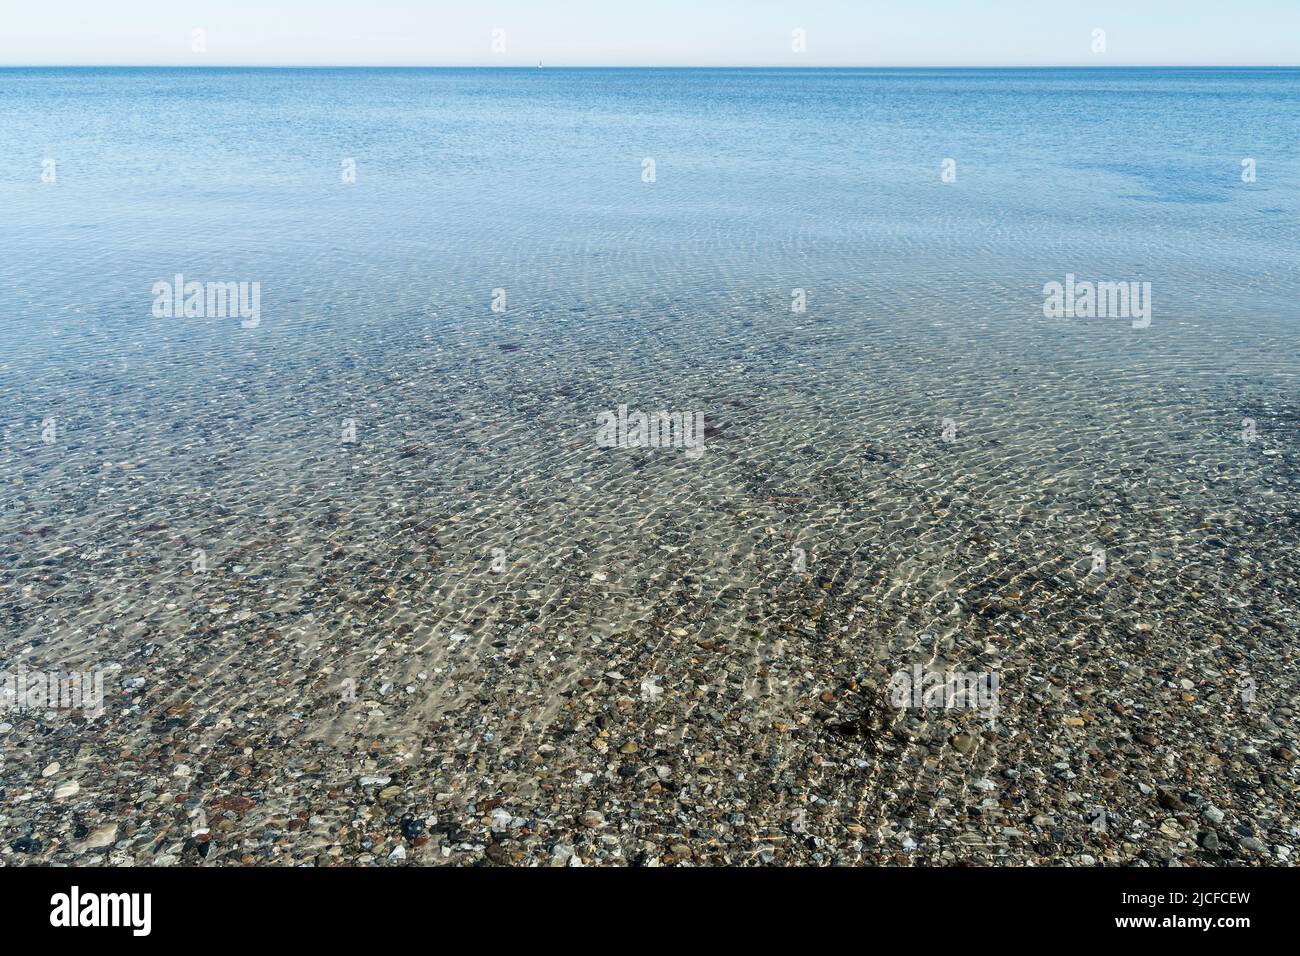 Schleswig-Holstein, mouth of the river Schleim, coast near Maasholm, pebble beach, reflections Stock Photo